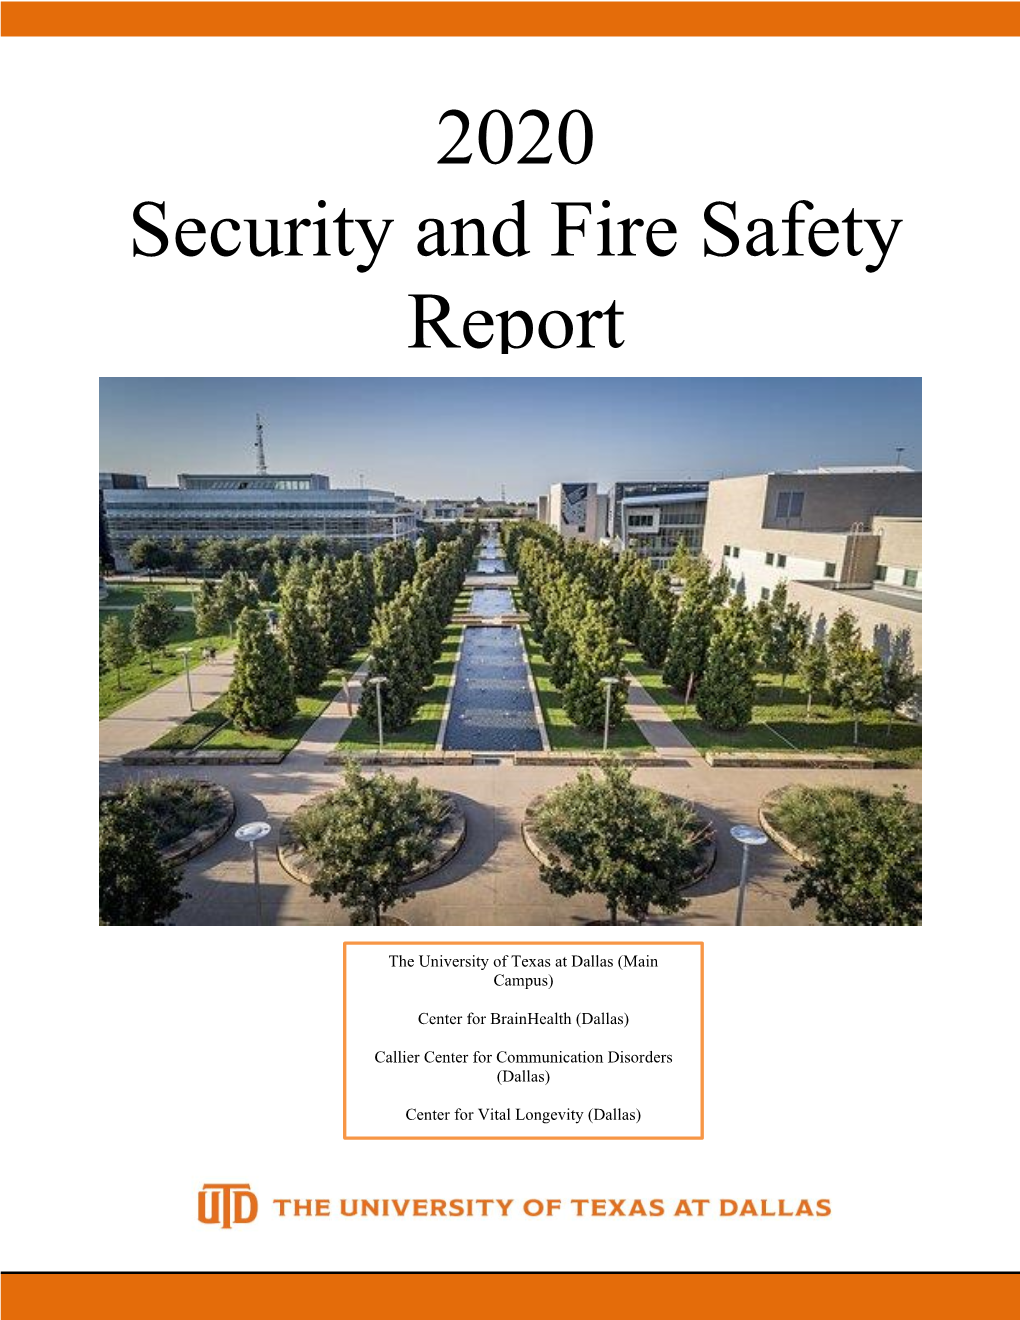 2020 Security and Fire Safety Report